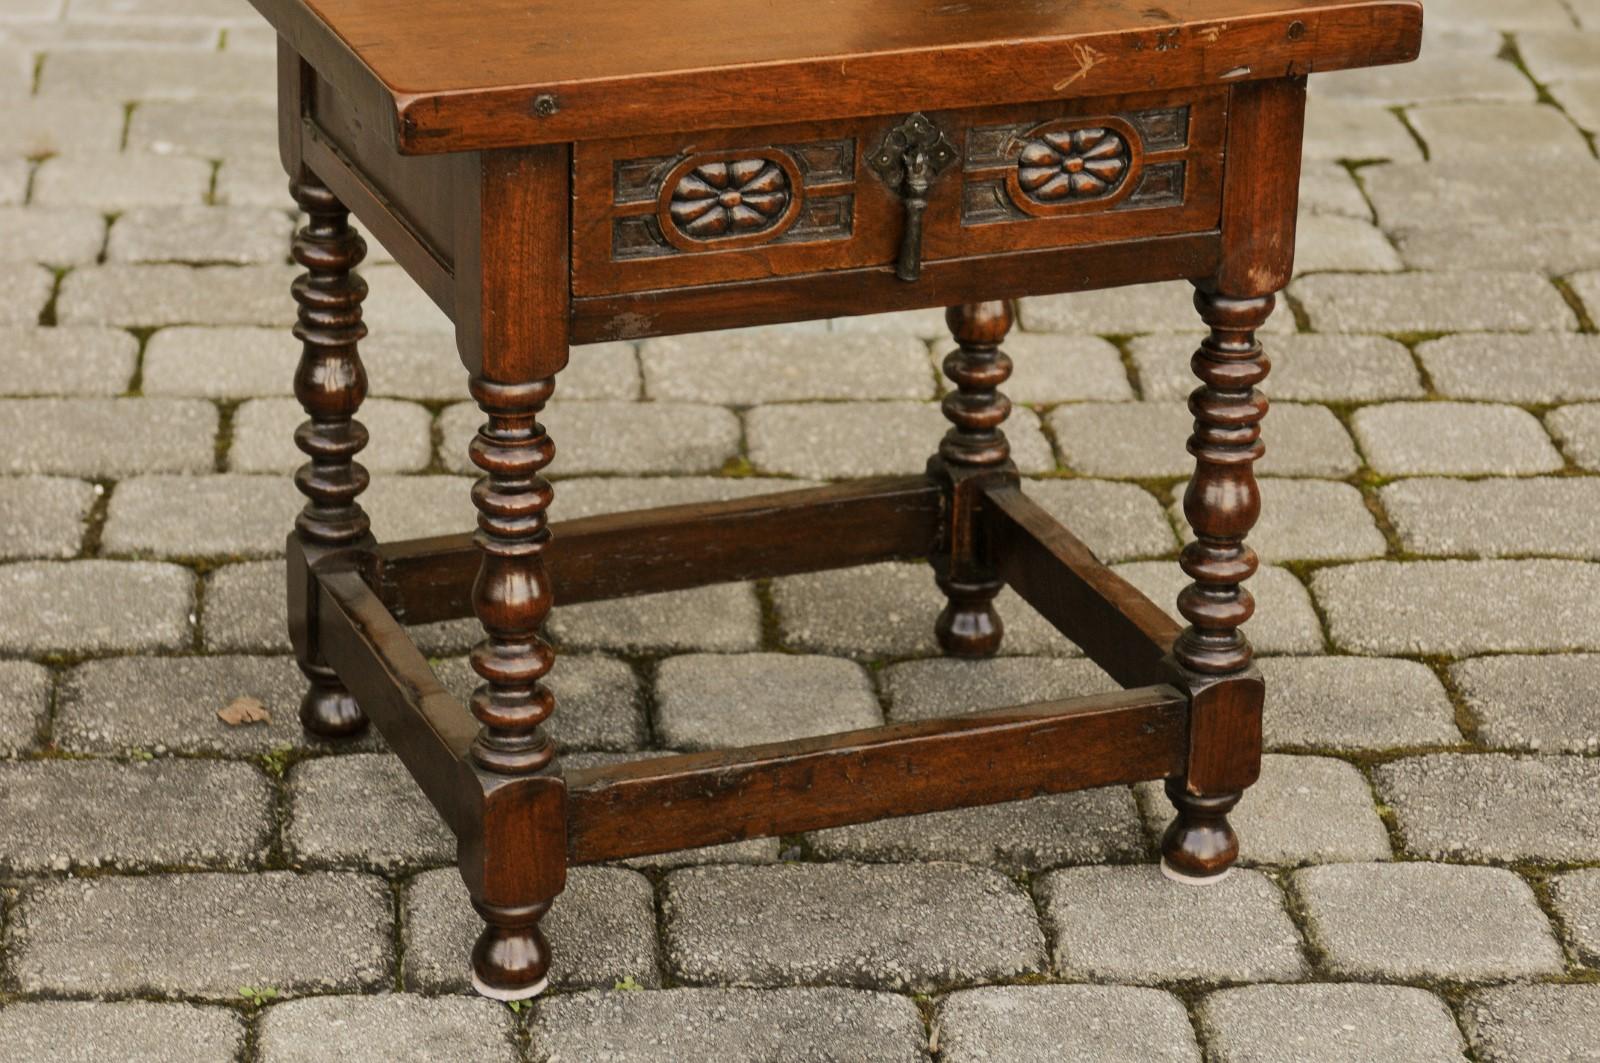 Italian 1900s Walnut Side Table with Drawer, Carved Rosettes and Turned Legs For Sale 1